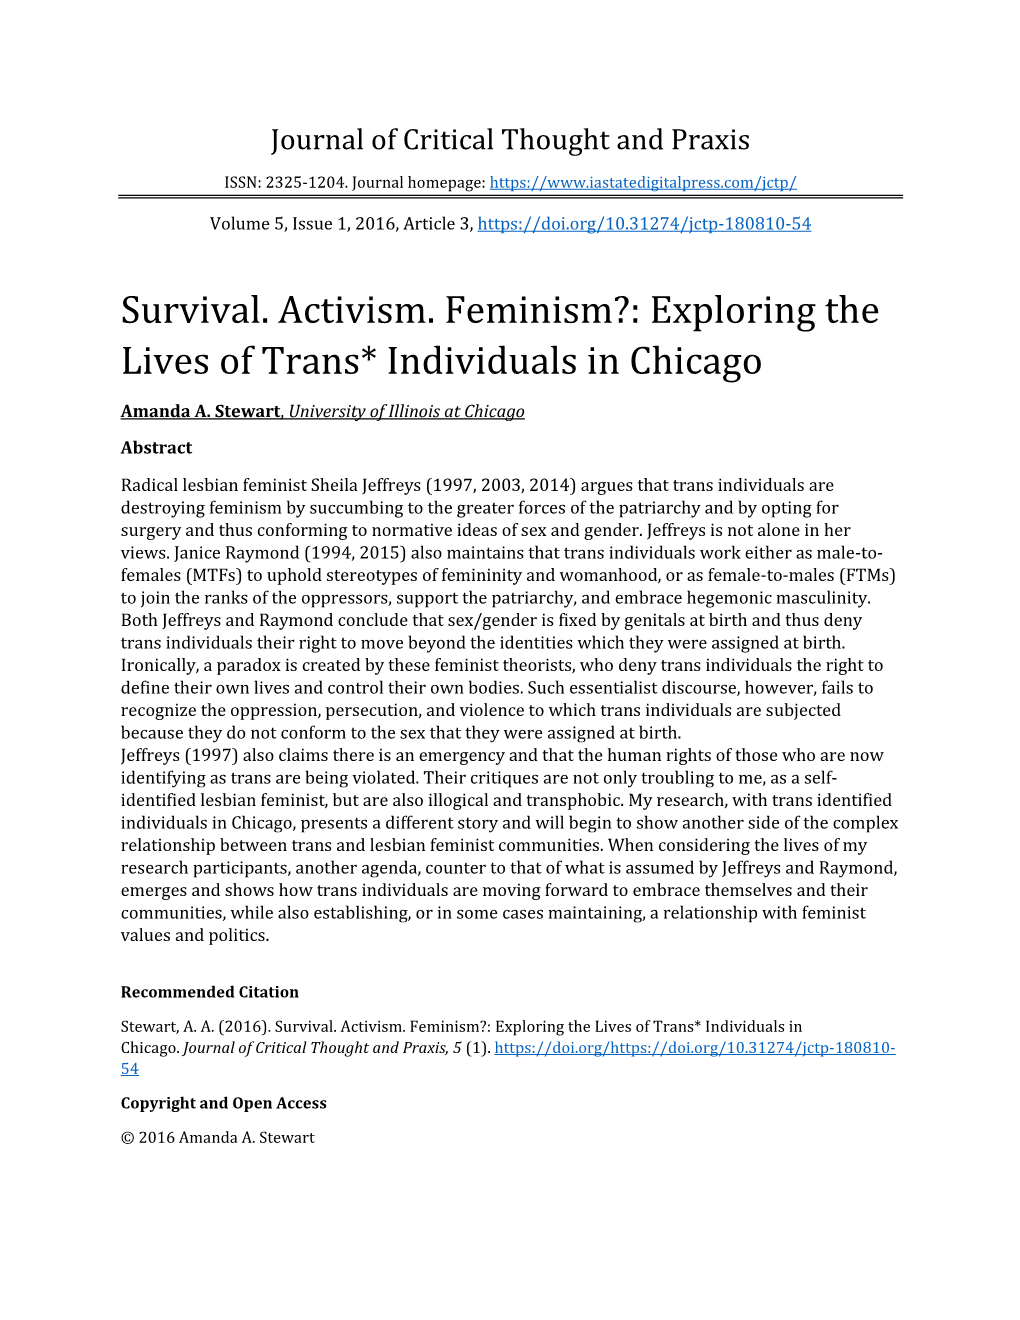 Survival. Activism. Feminism?: Exploring the Lives of Trans* Individuals in Chicago